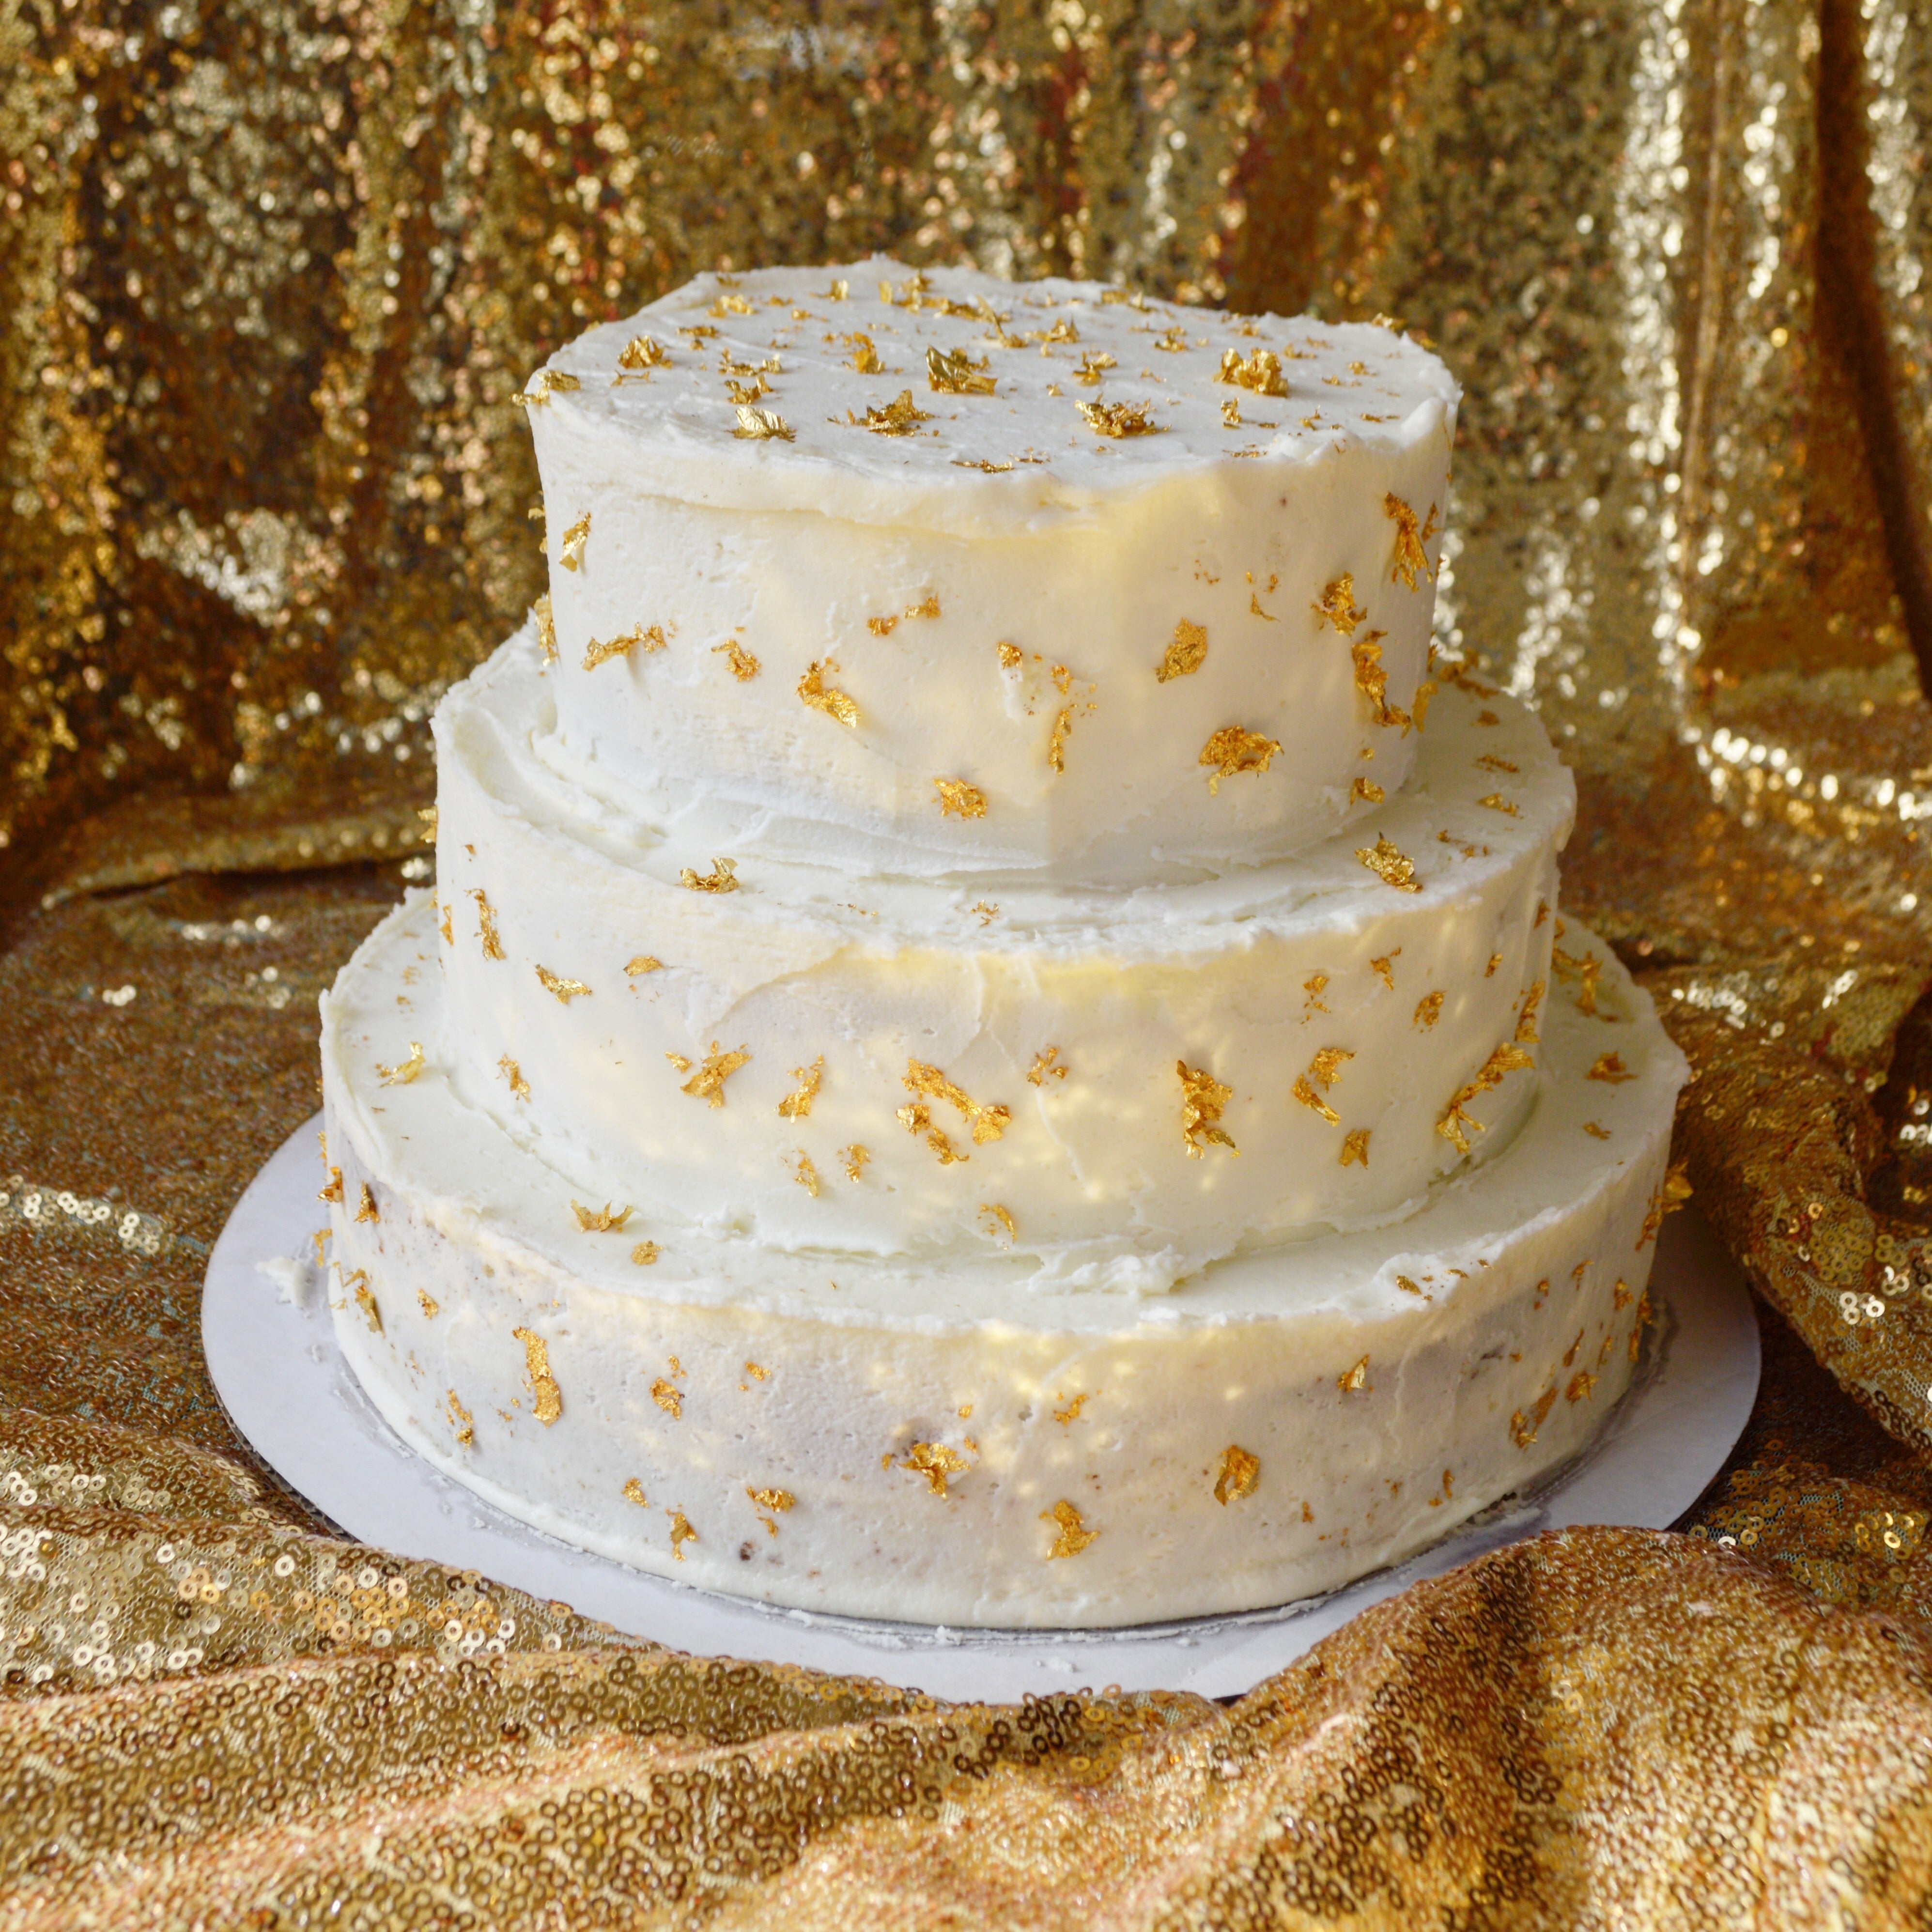 Chefanie tiered cake with gold leaf